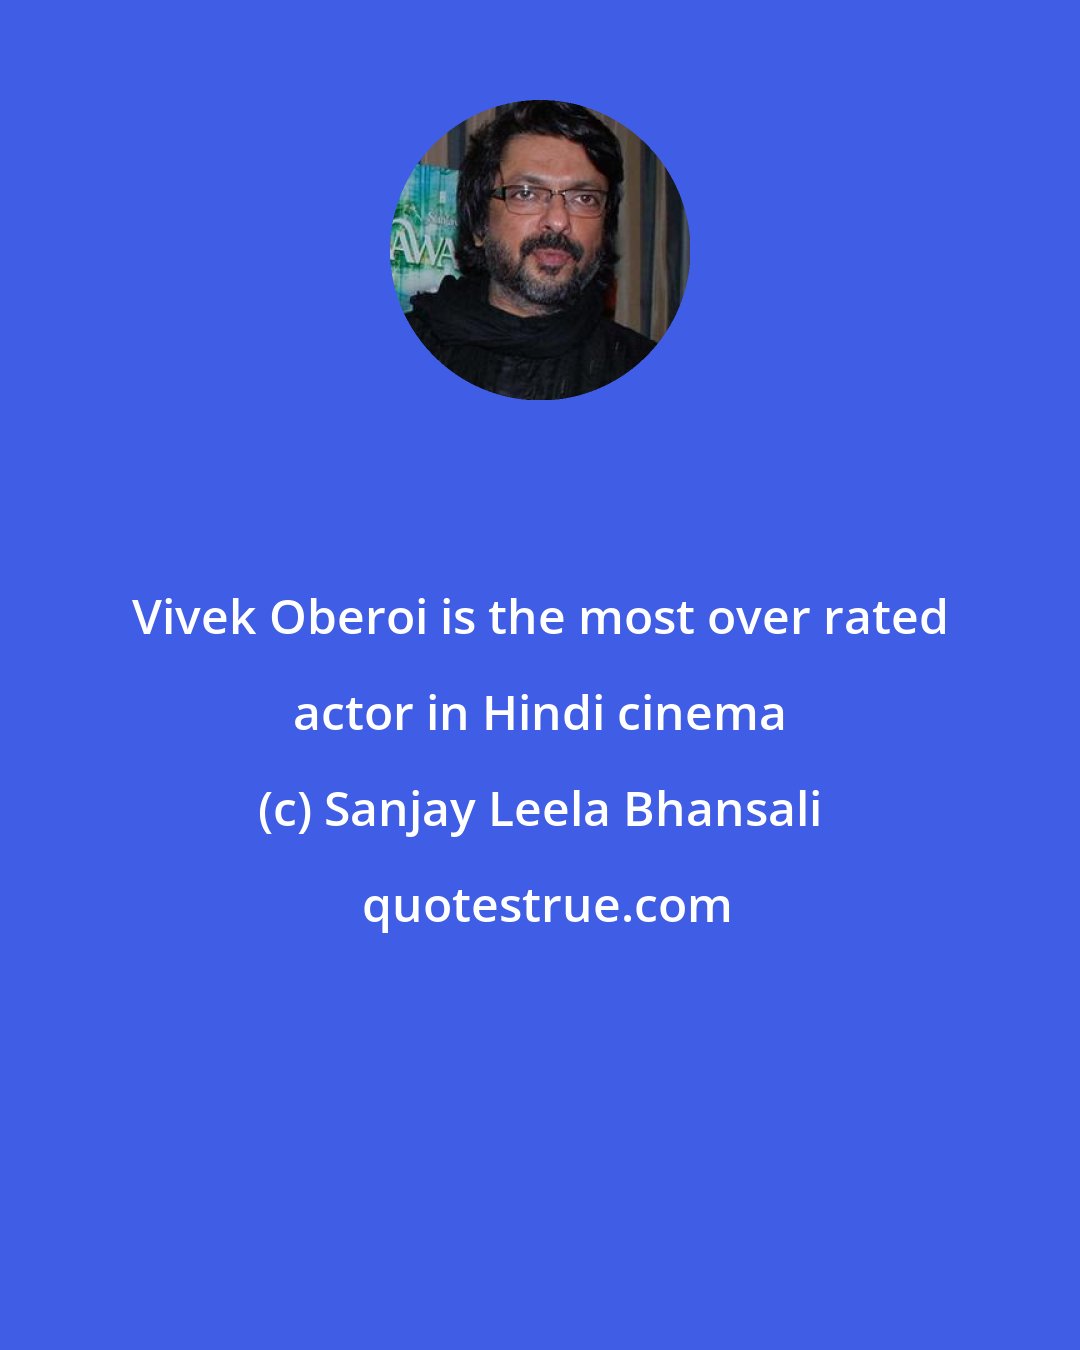 Sanjay Leela Bhansali: Vivek Oberoi is the most over rated actor in Hindi cinema